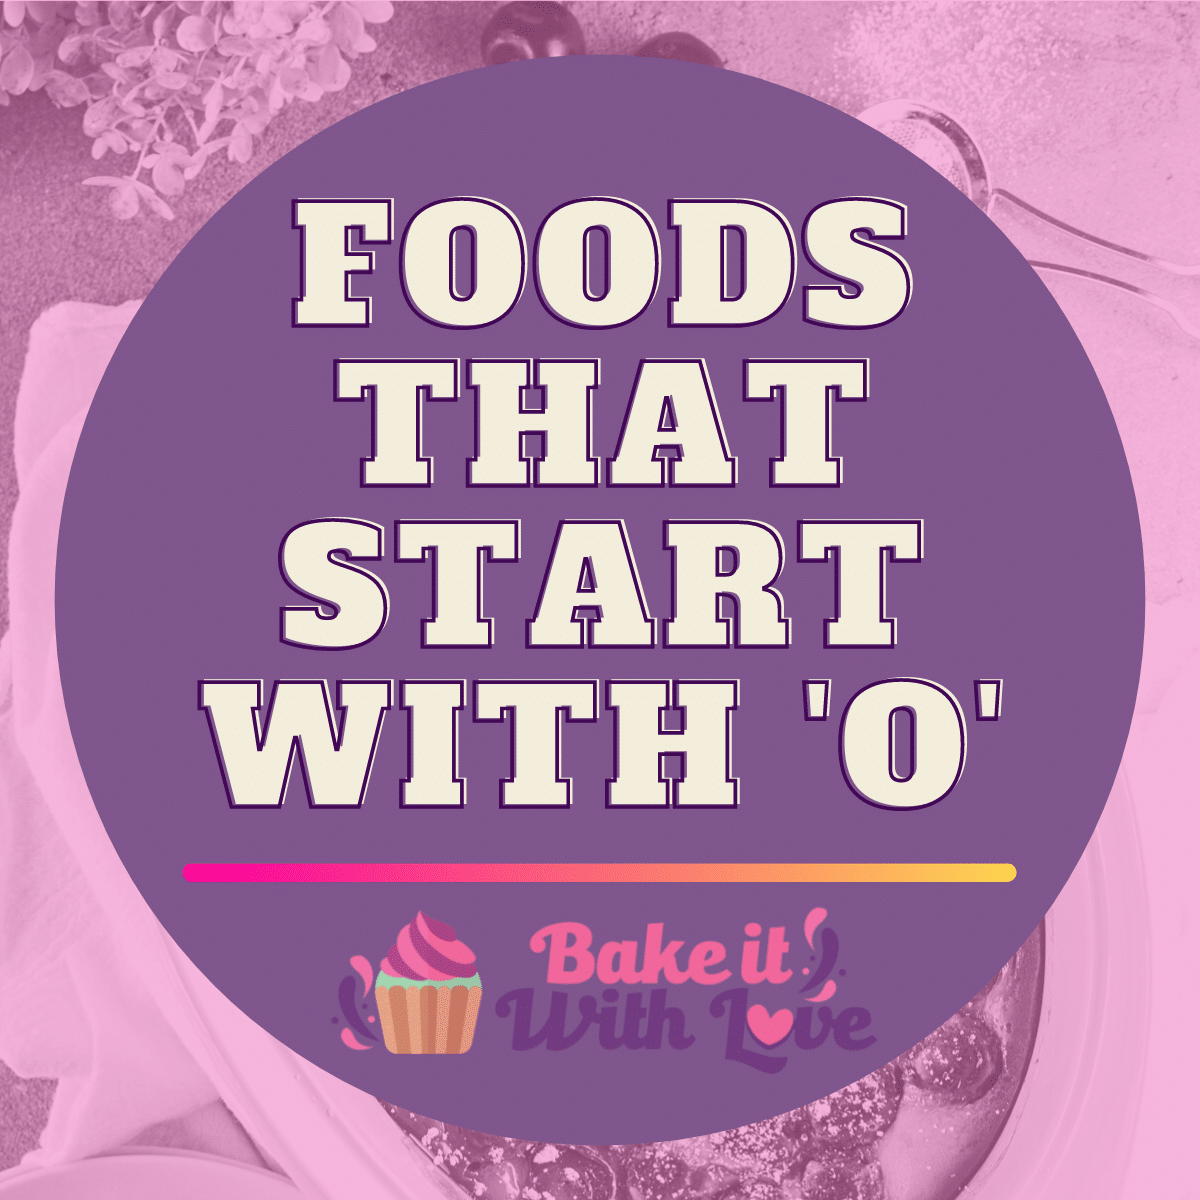 Foods That Start With O